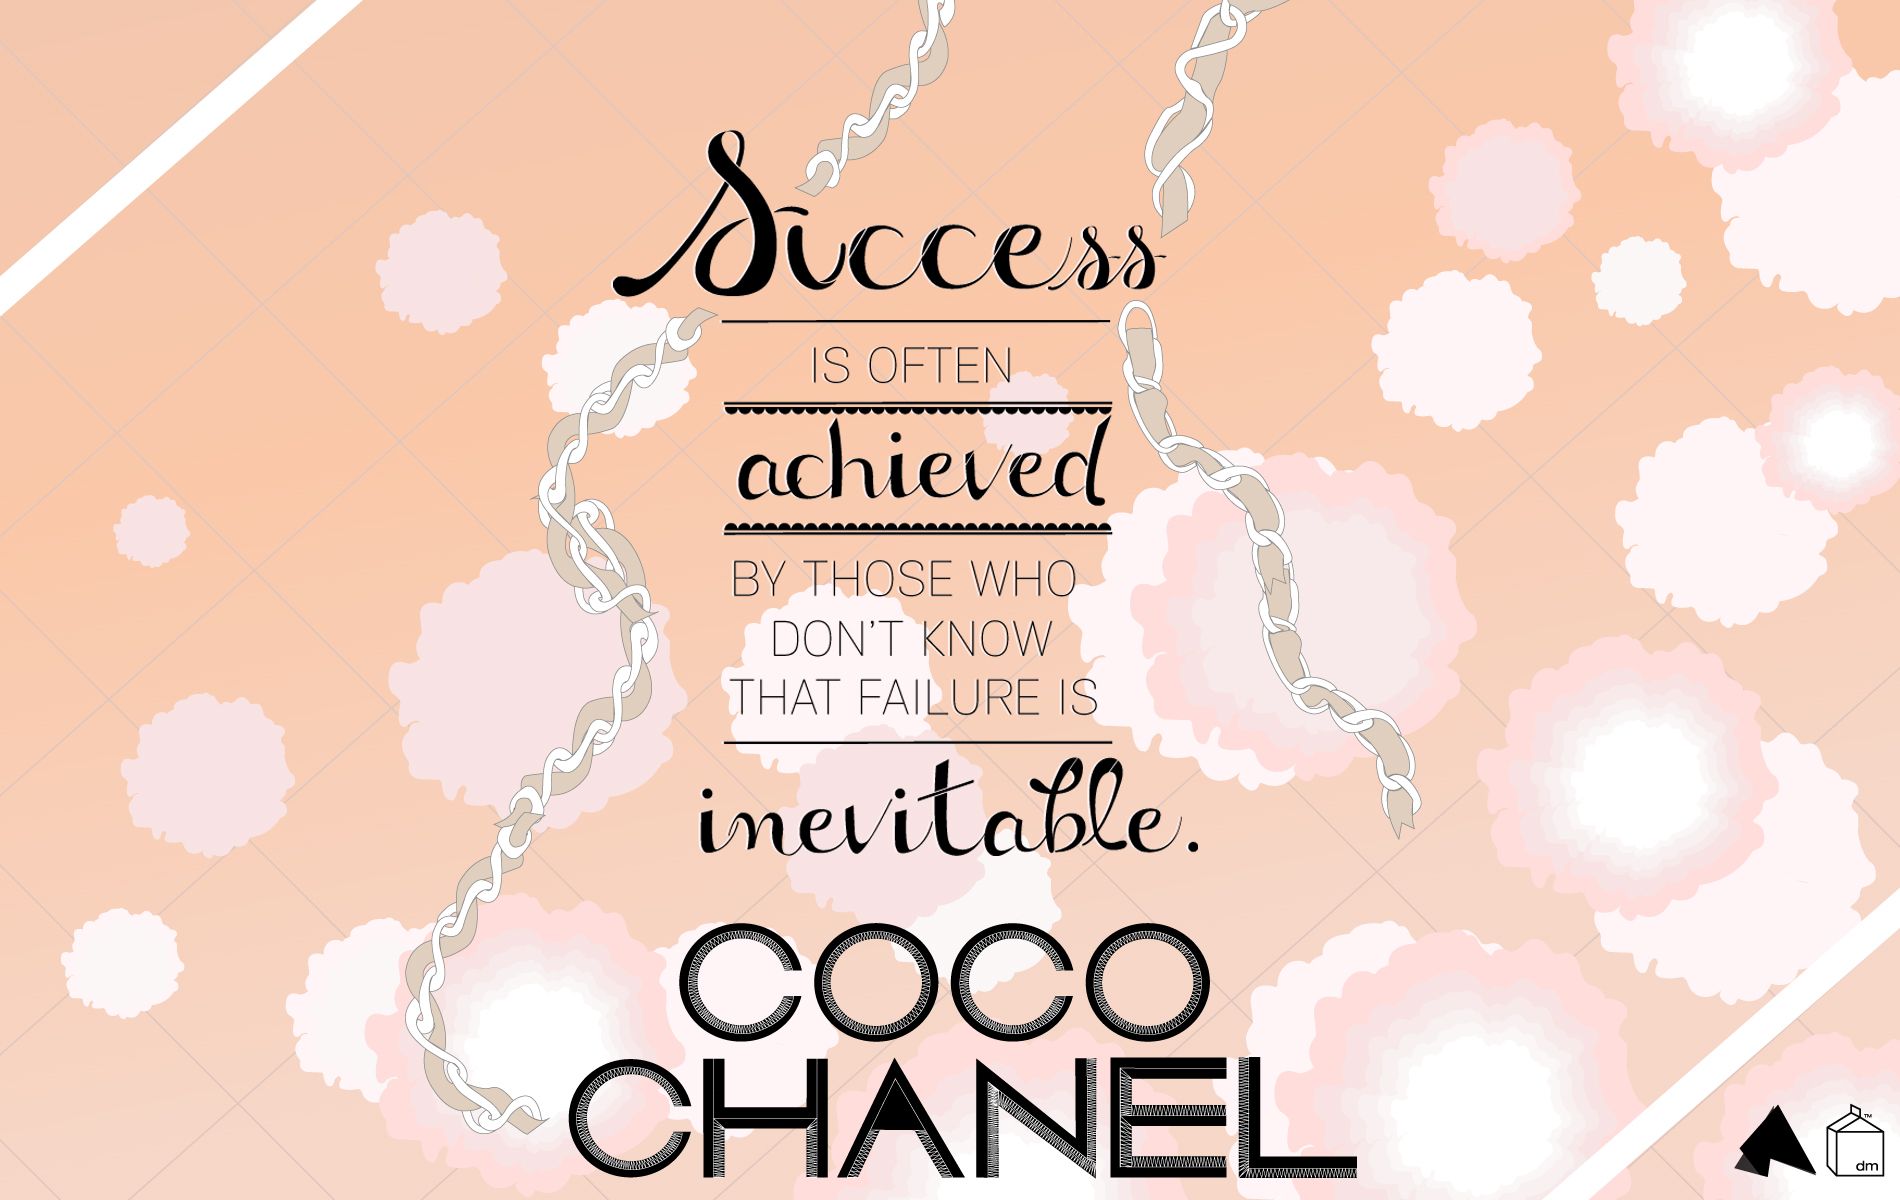 Coco Chanel Quotes Wallpaper. QuotesGram